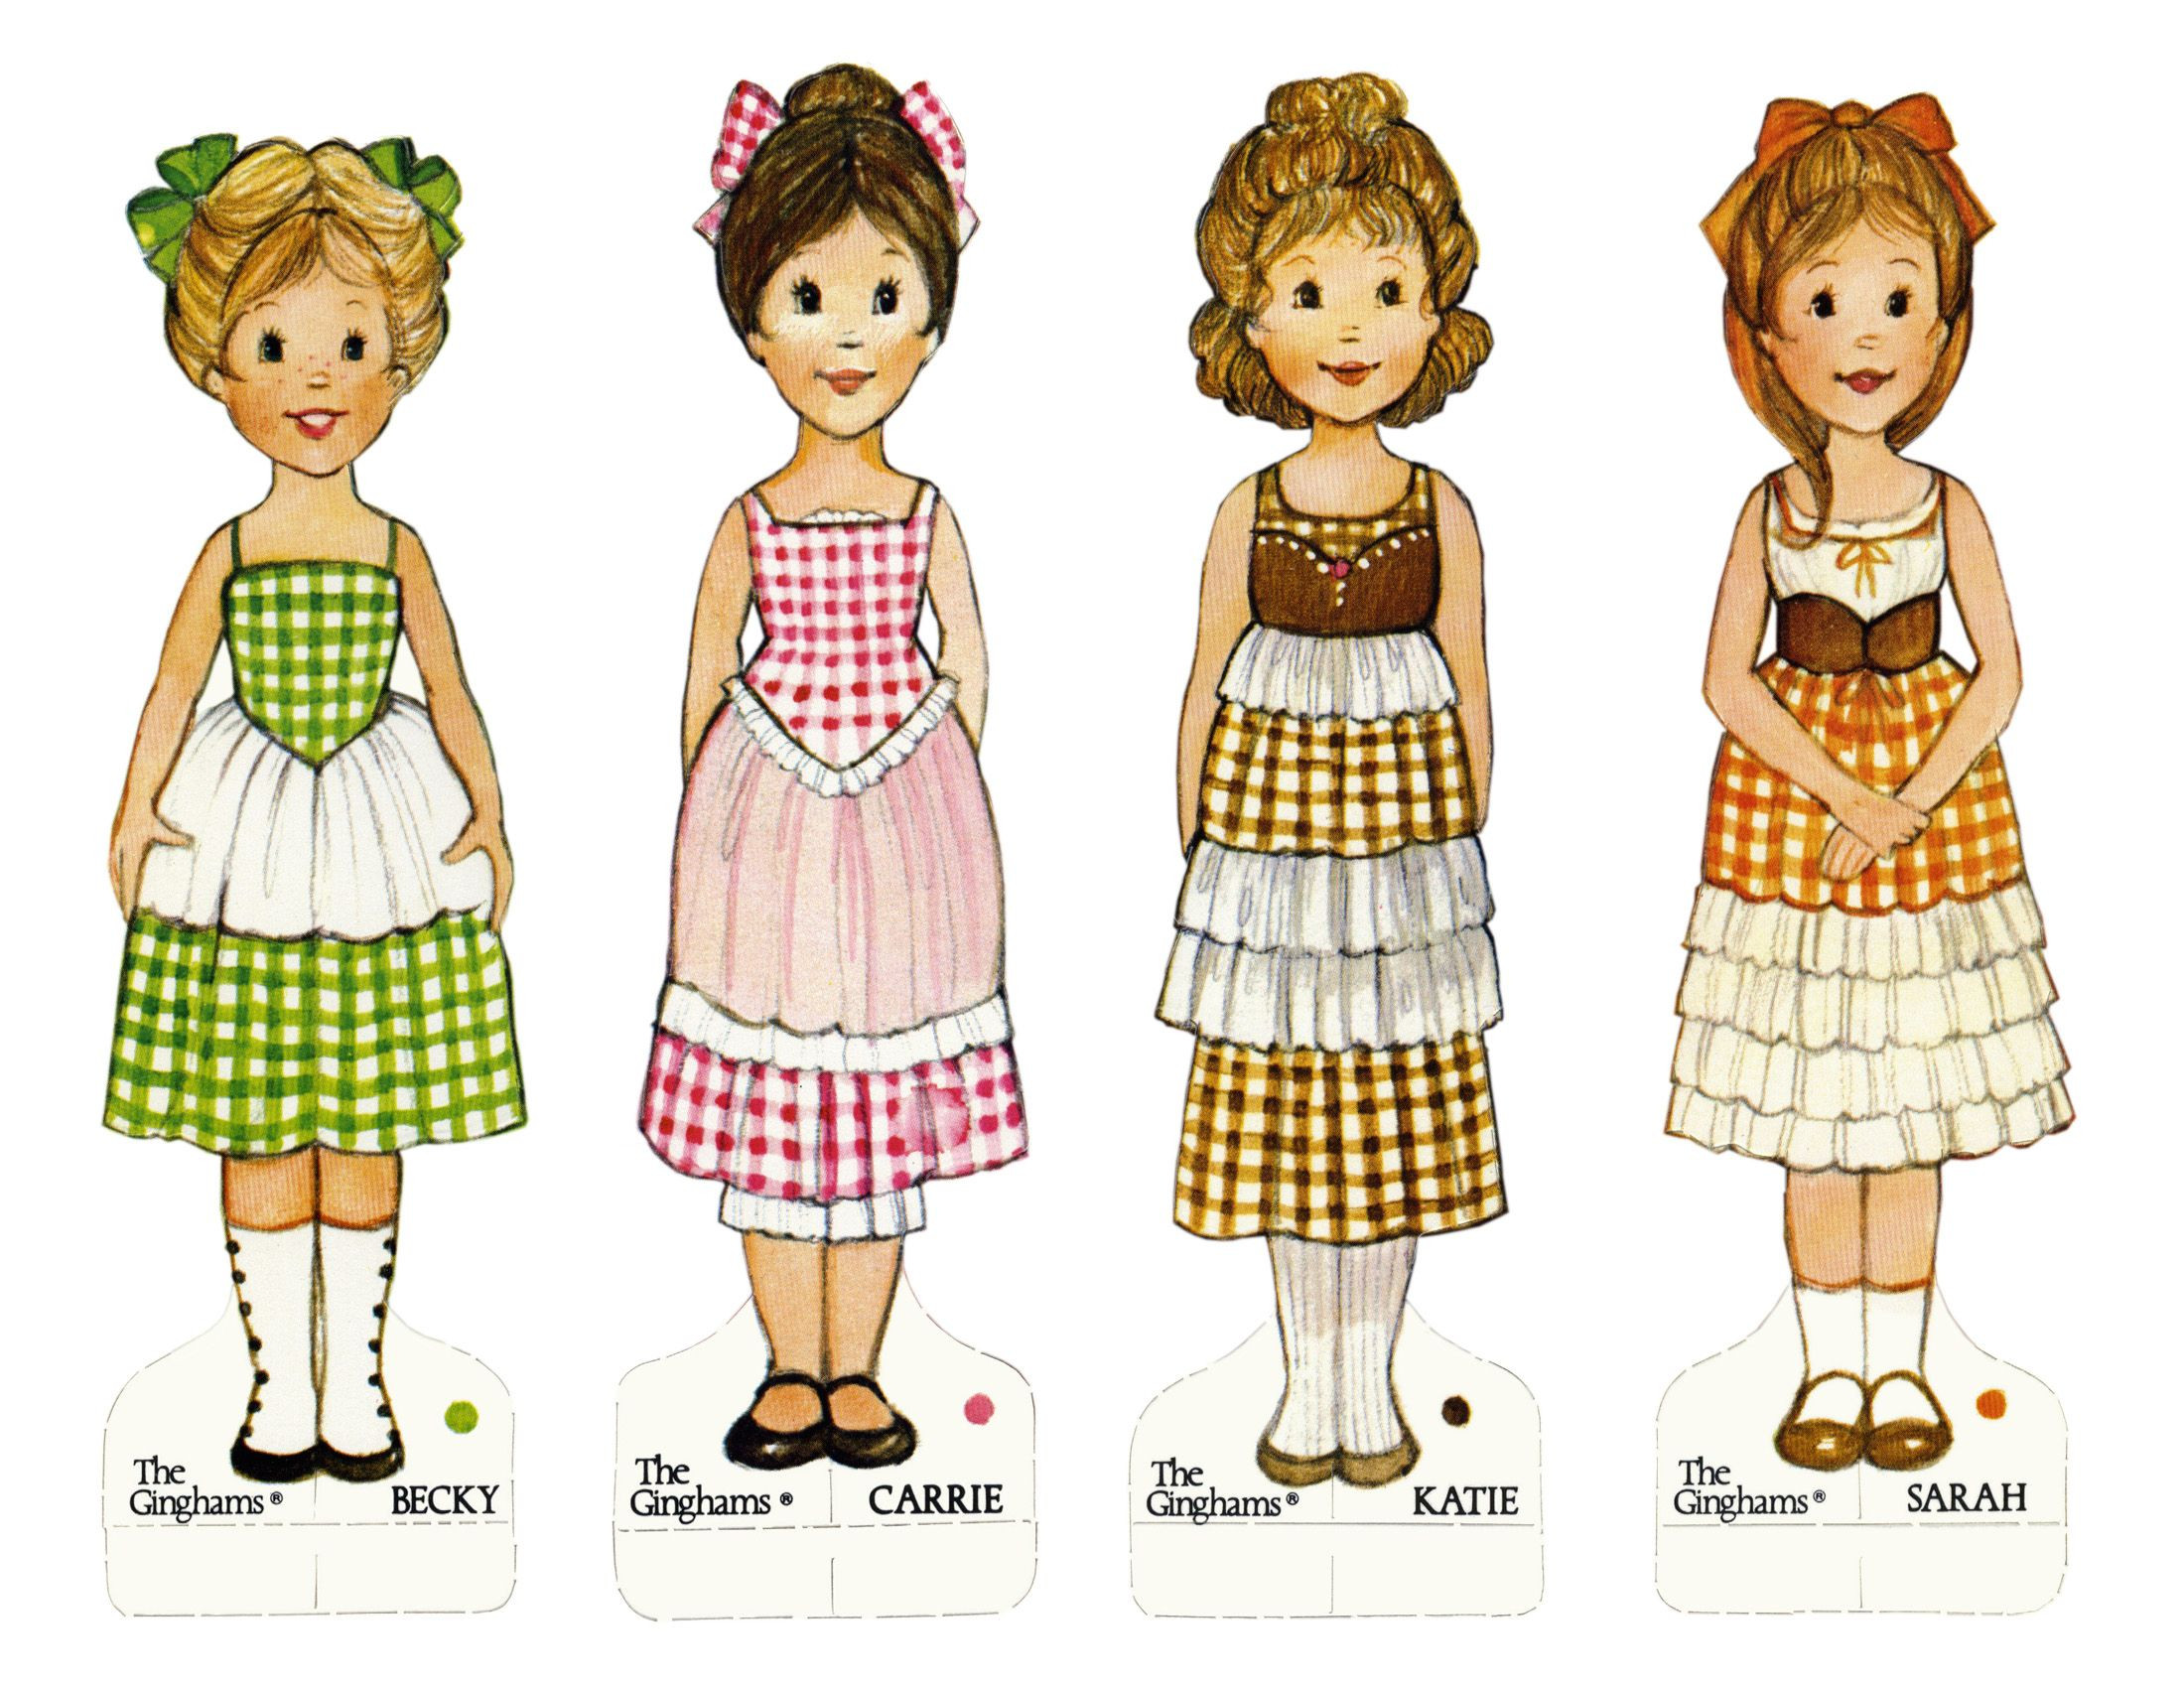 Gingham Girls Coloring Book
 The Ginghams paper dolls & coloring books Great fun I